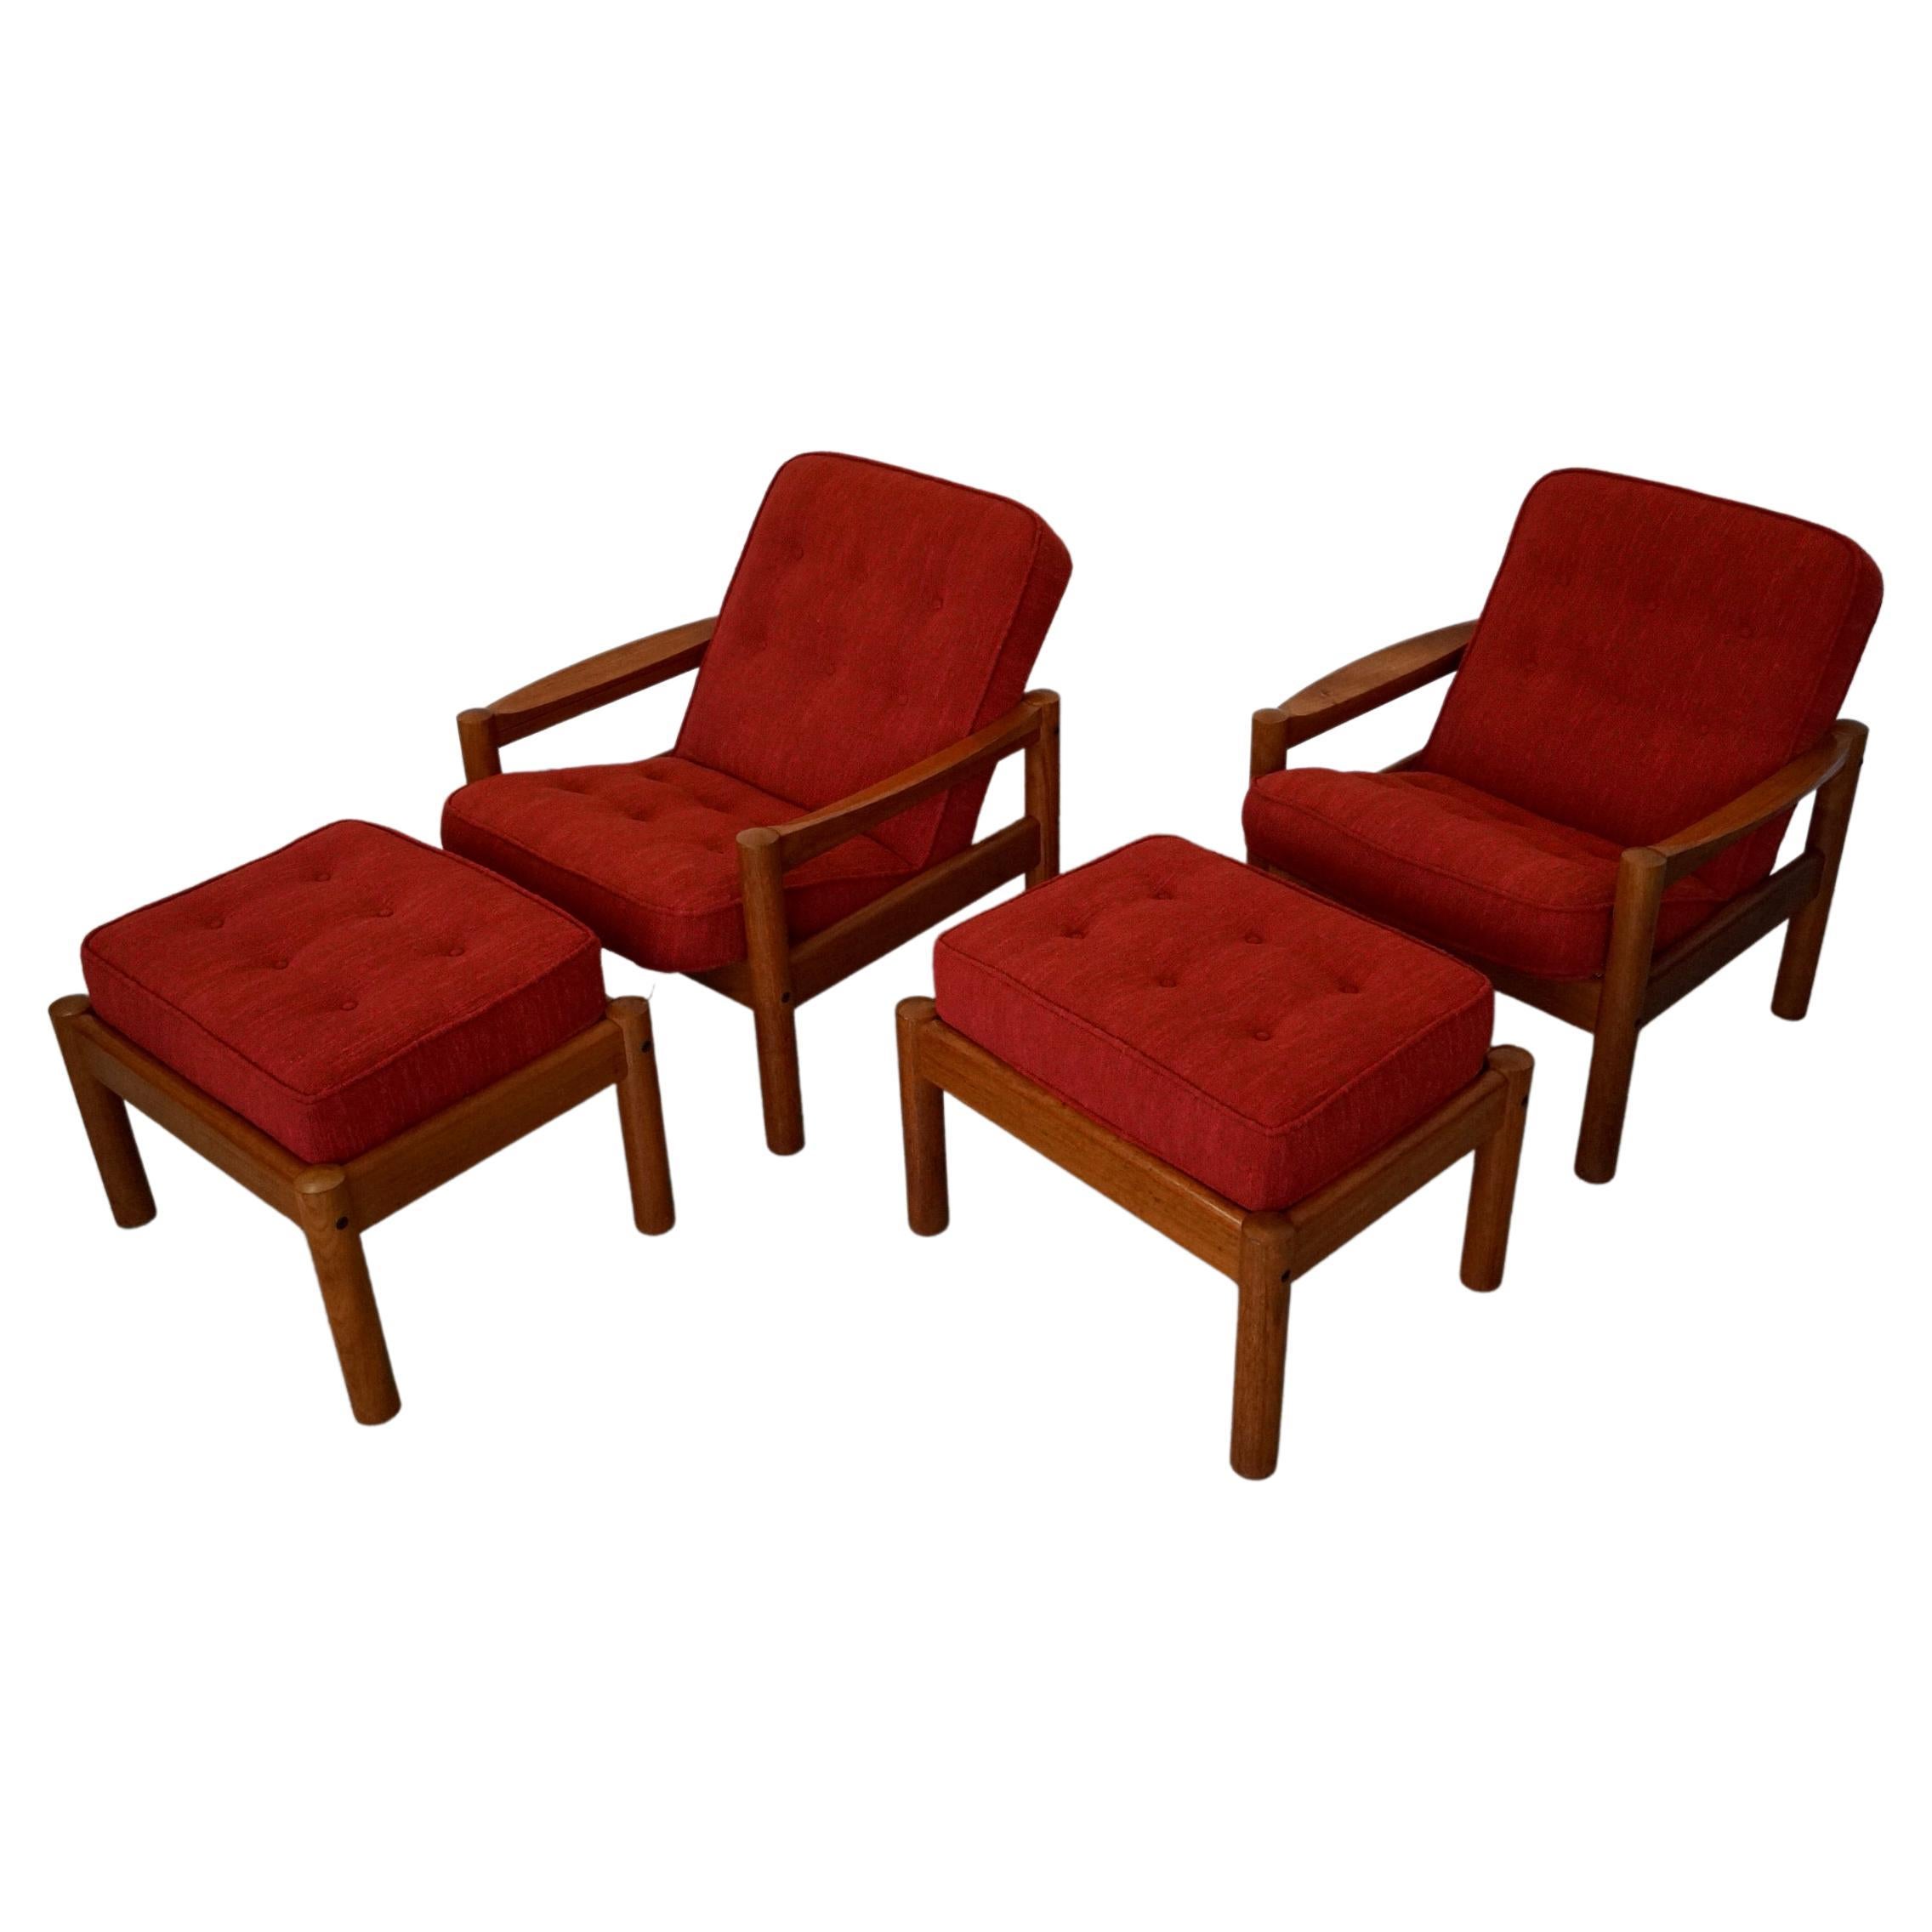 Pair of vintage Midcentury Modern lounge chairs for sale. They were manufactured in the 1970's, and have been professionally reupholstered in a nubby red fabric that is period correct. They have a solid teak frame, and come with a solid teak foot